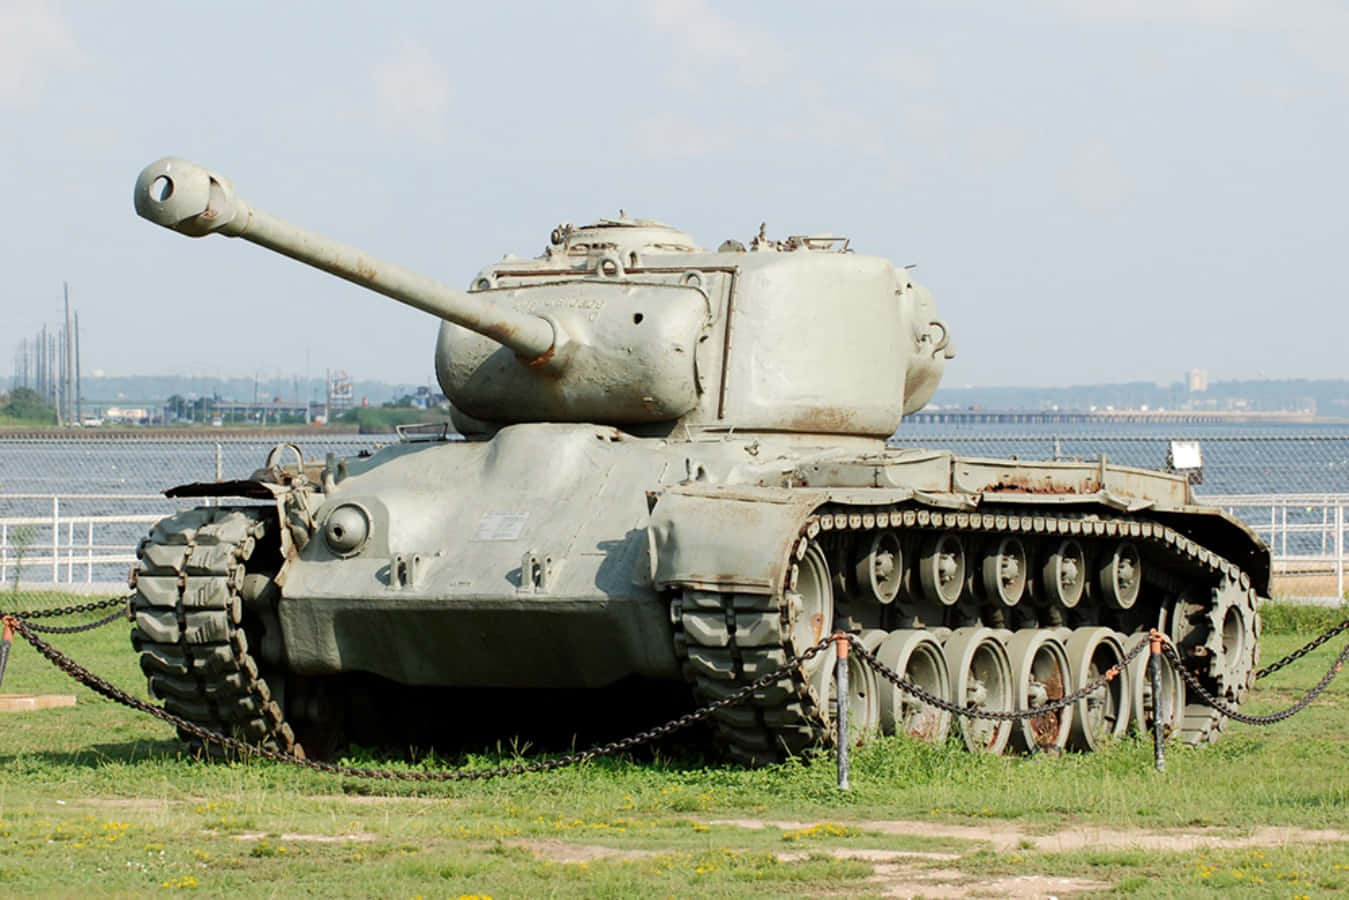 A WWII-era Tank from the Allied Armies